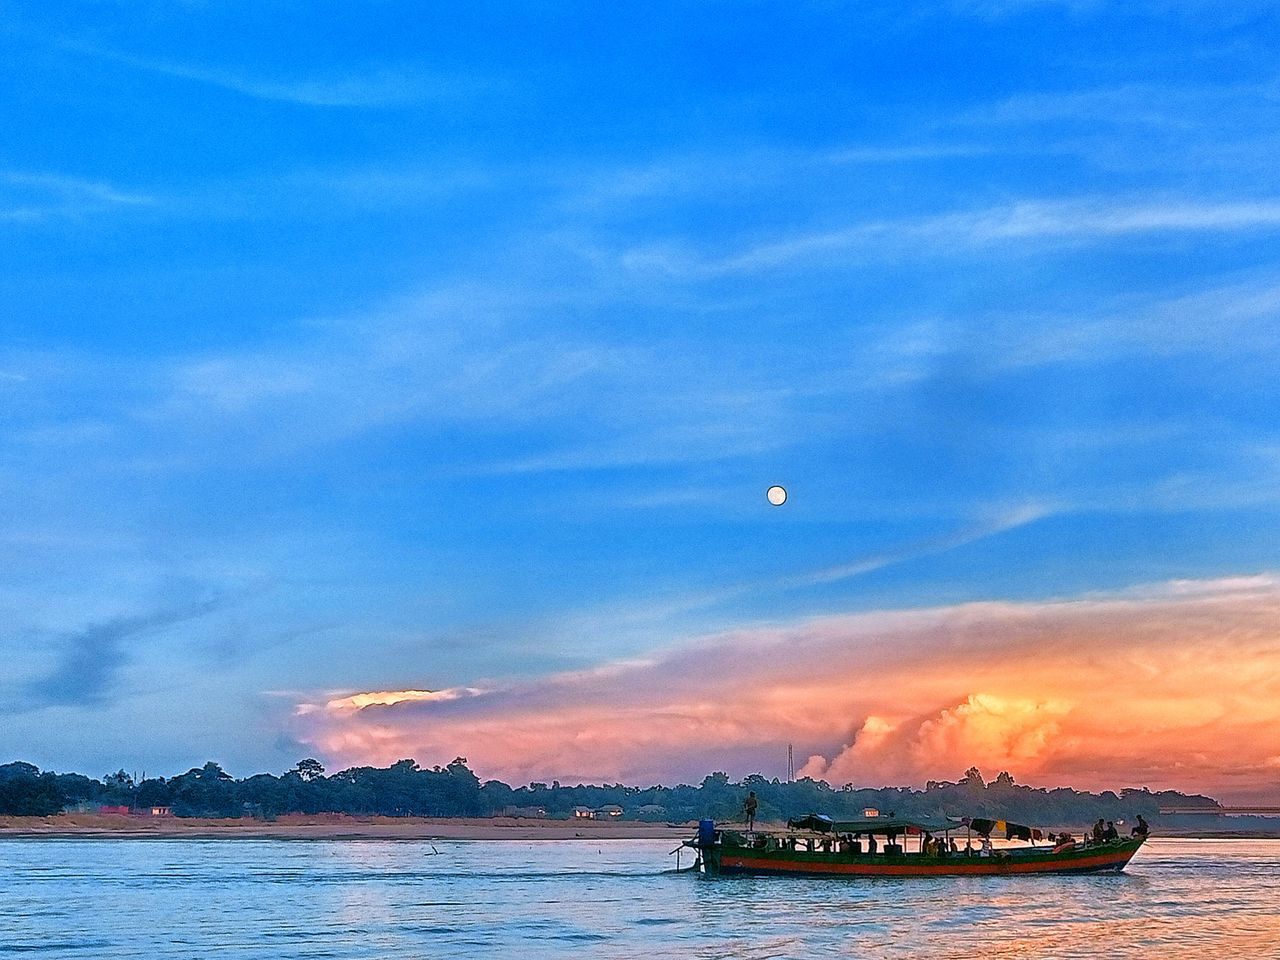 water, sky, transportation, nautical vessel, vehicle, sea, cloud, horizon, mode of transportation, nature, ocean, dusk, bay, shore, blue, travel, boat, ship, beauty in nature, scenics - nature, sunset, coast, no people, watercraft, travel destinations, evening, outdoors, tranquility, land, landscape, environment, moon, beach, sailing, architecture, tranquil scene, mountain, tourism